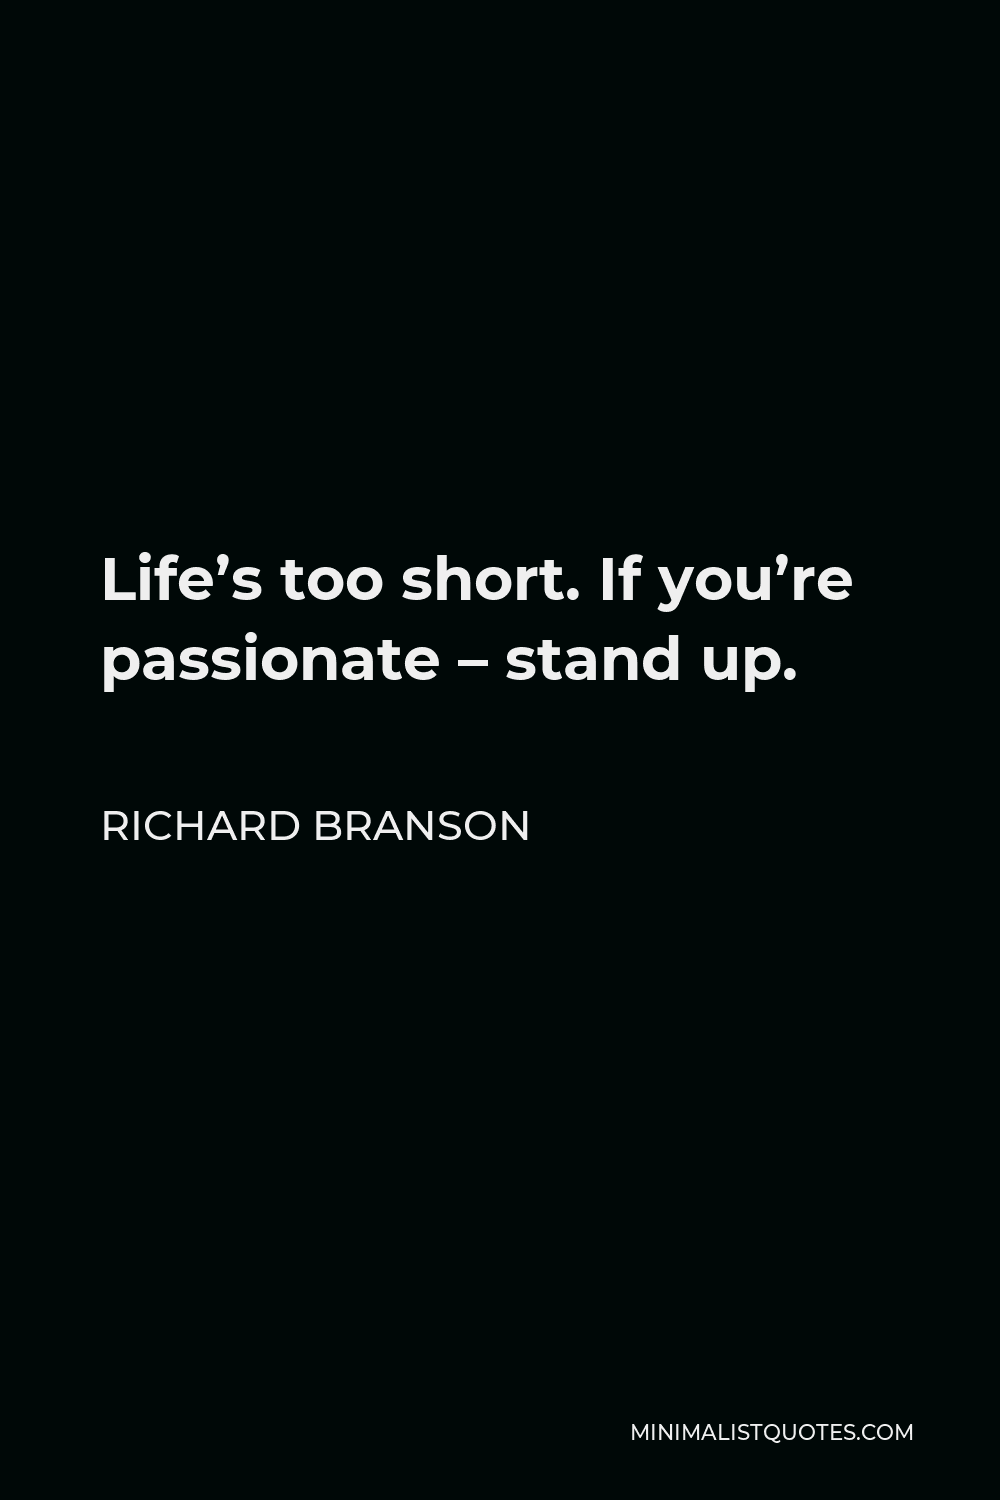 Richard Branson Quote - Life’s too short. If you’re passionate – stand up.